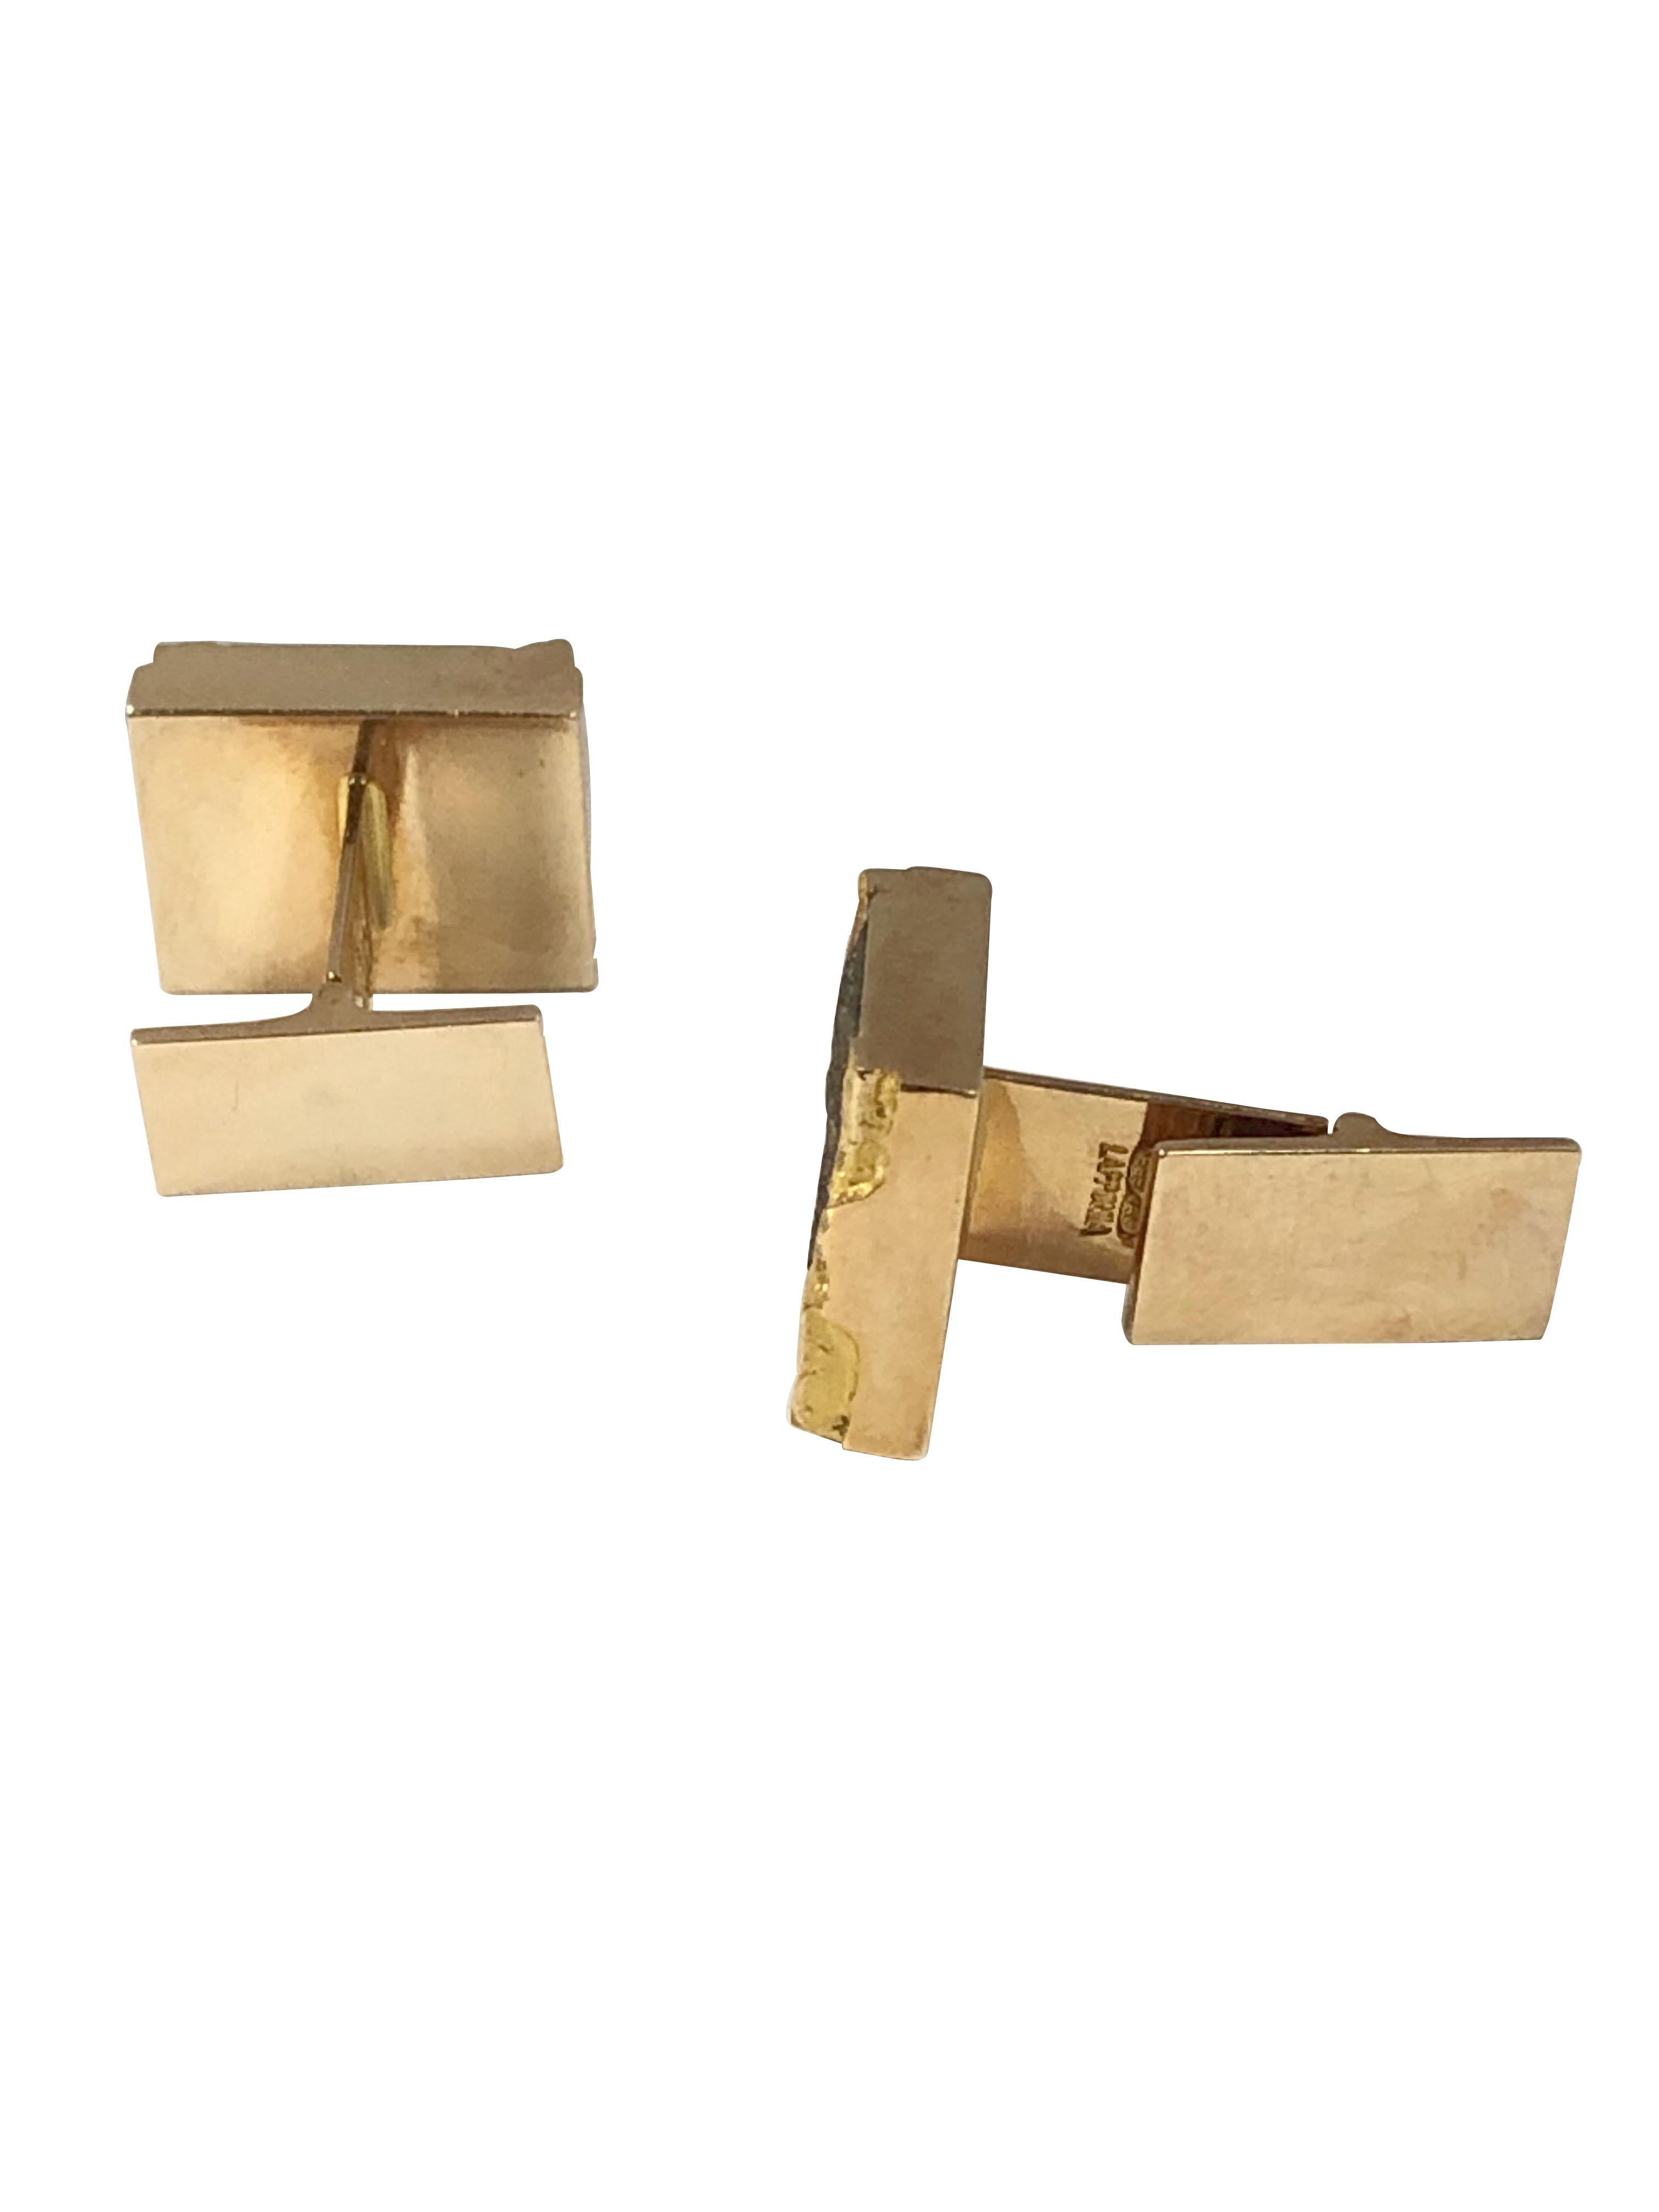 Circa 1980s Bjorn Weckstrom for Lapponia 14k Yellow Gold Modernist designed Cufflinks, the tops measure 5/8 x 1/2 inch and centrally set with a Brownish Gray Calcite stone. Toggle Backs for easy on and off. 